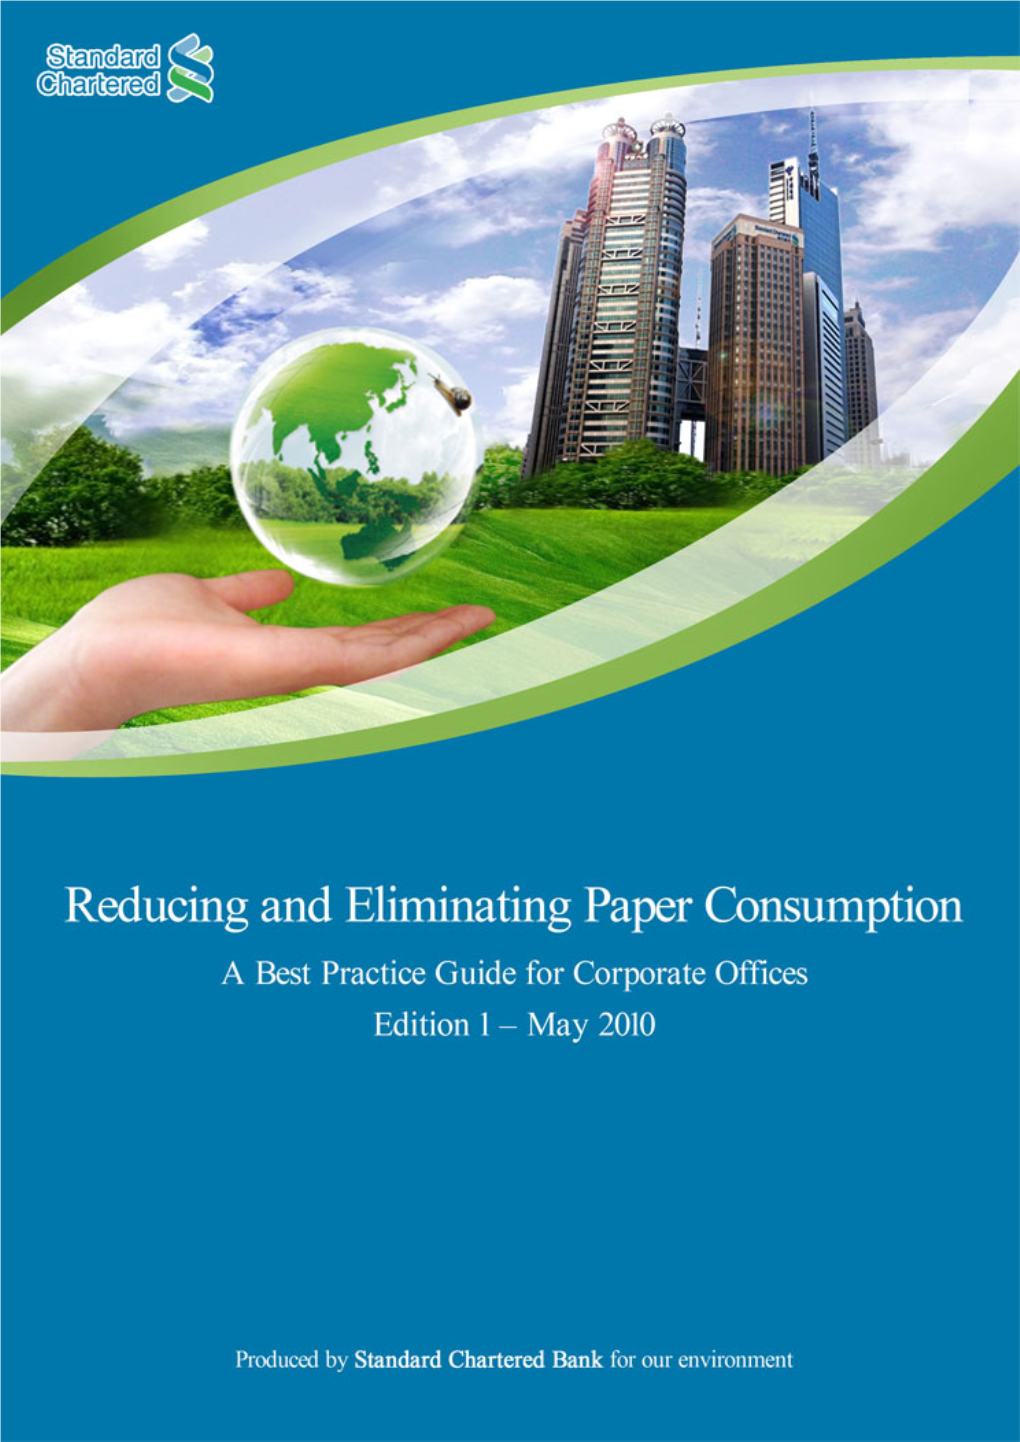 Reducing and Eliminating Paper Consumption